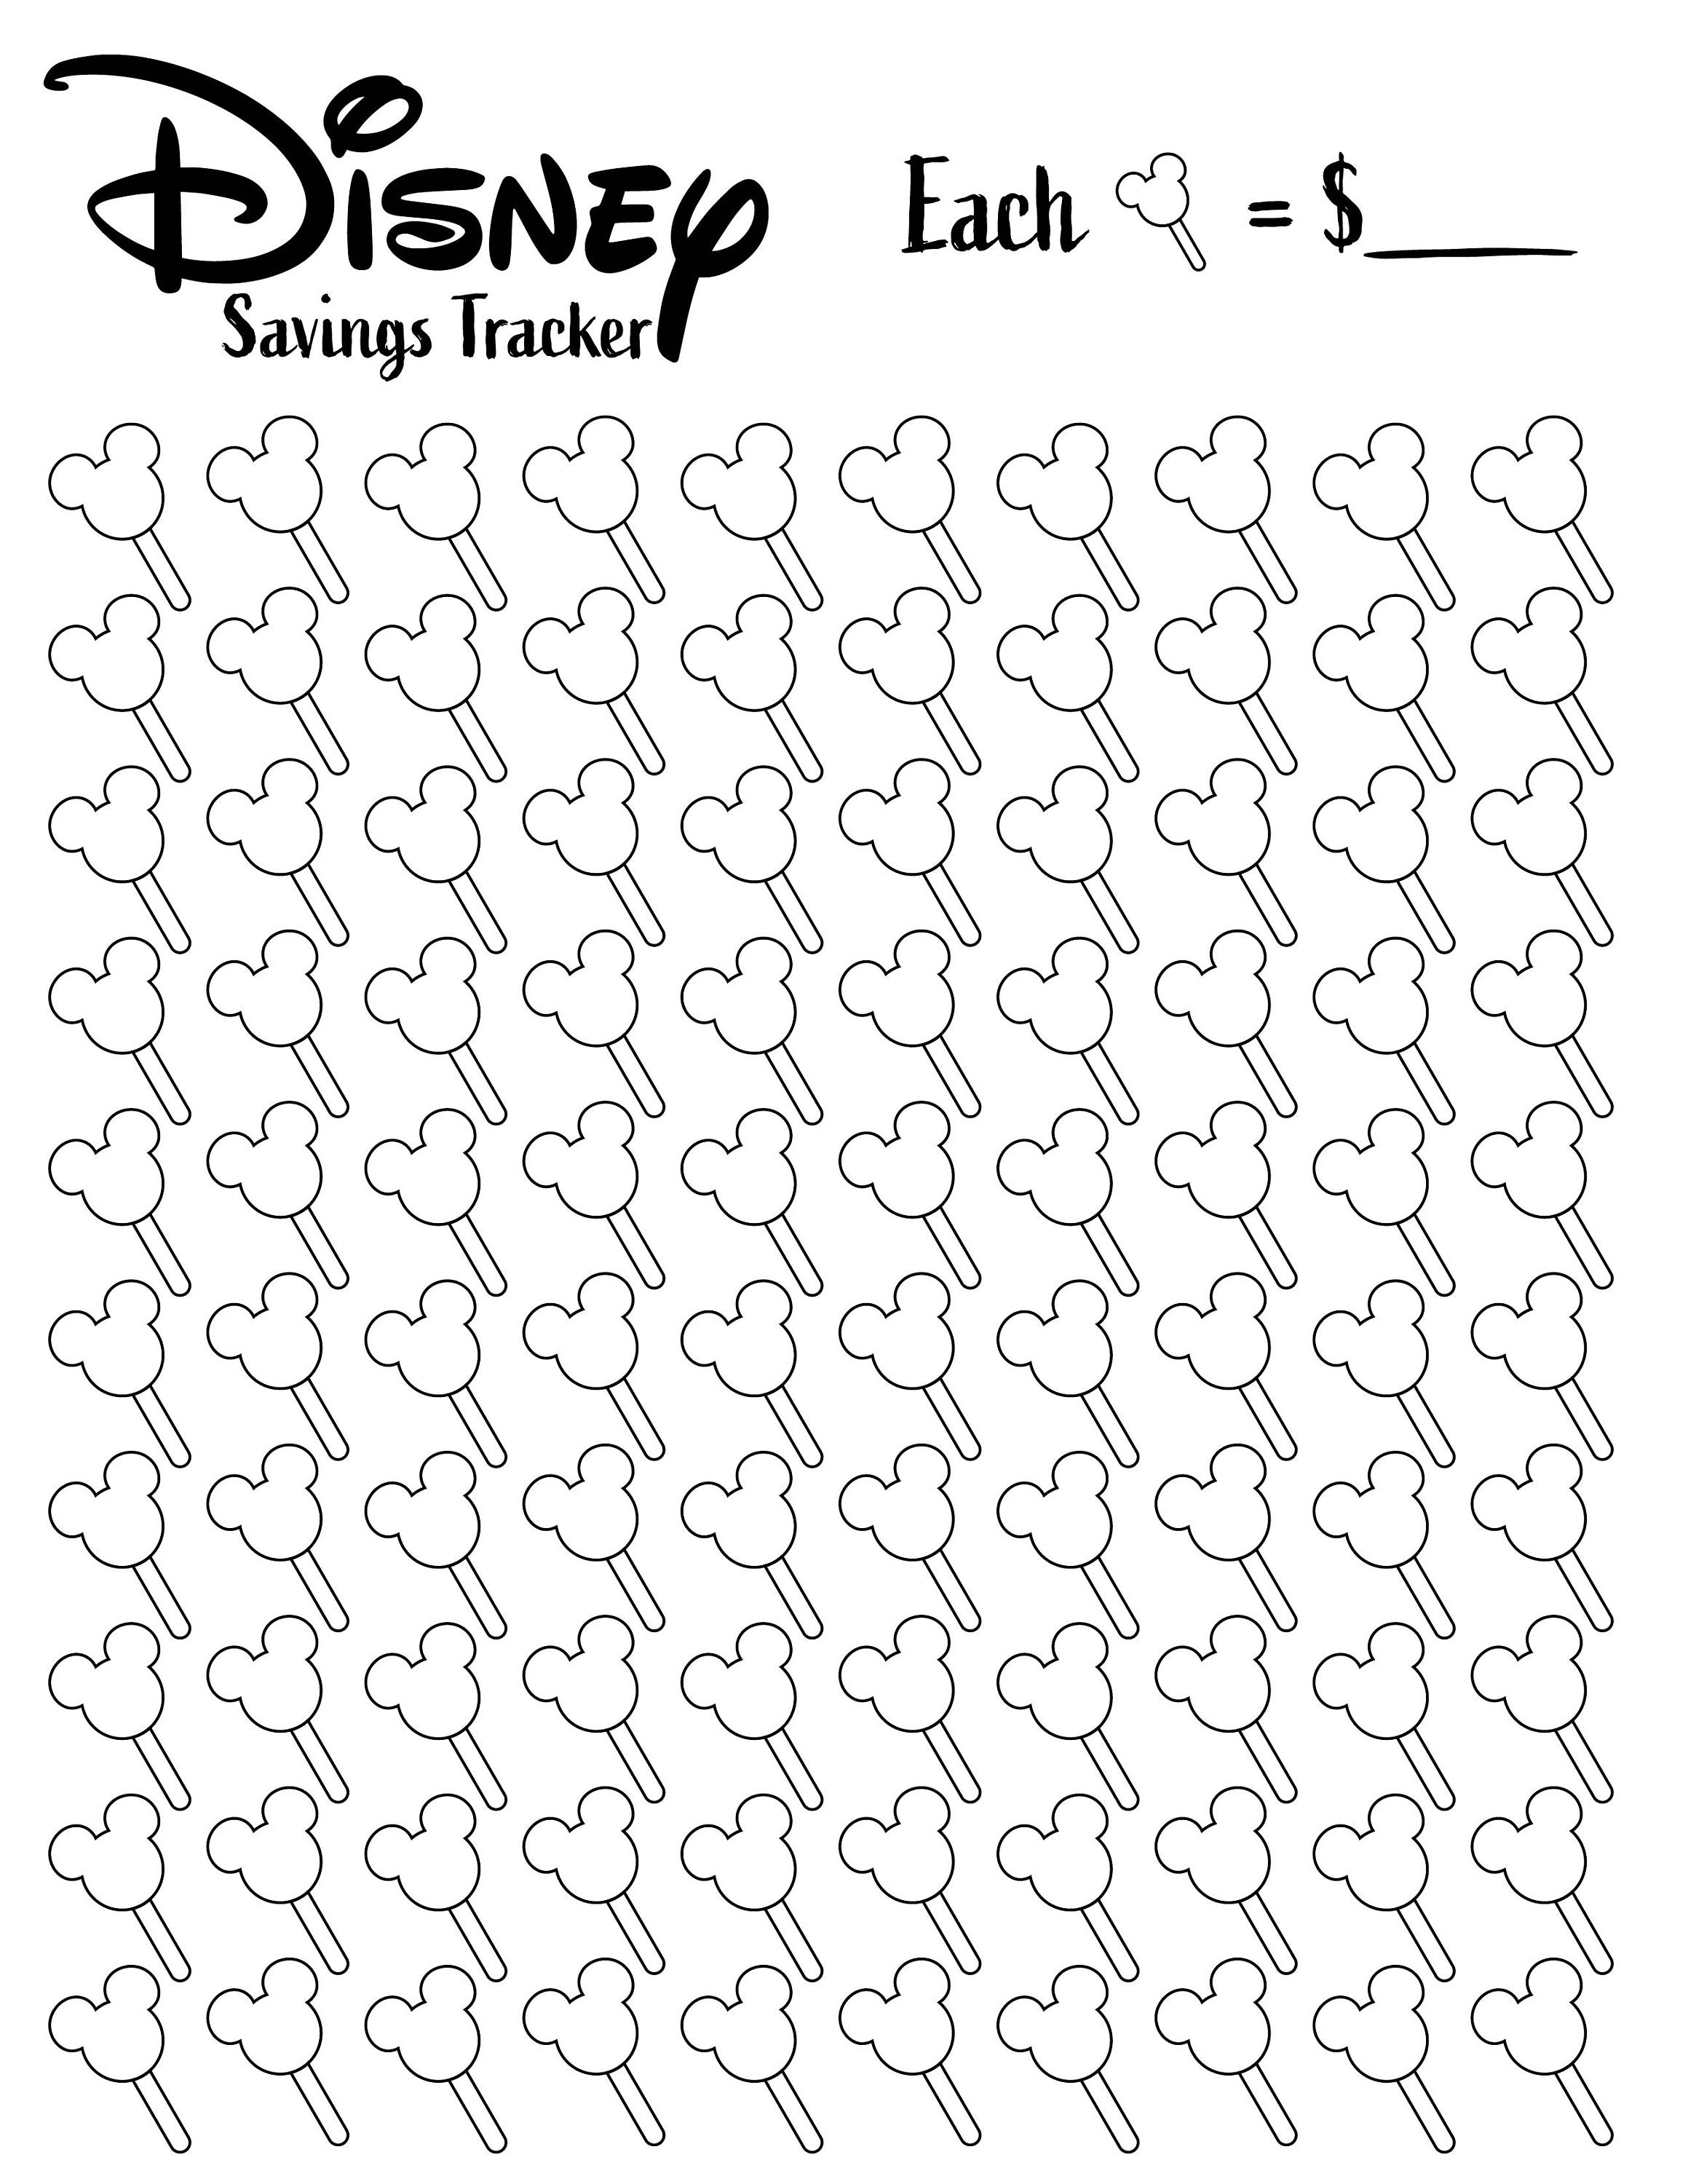 disney-savings-tracker-featuring-mickey-mouse-bars-track-your-etsy